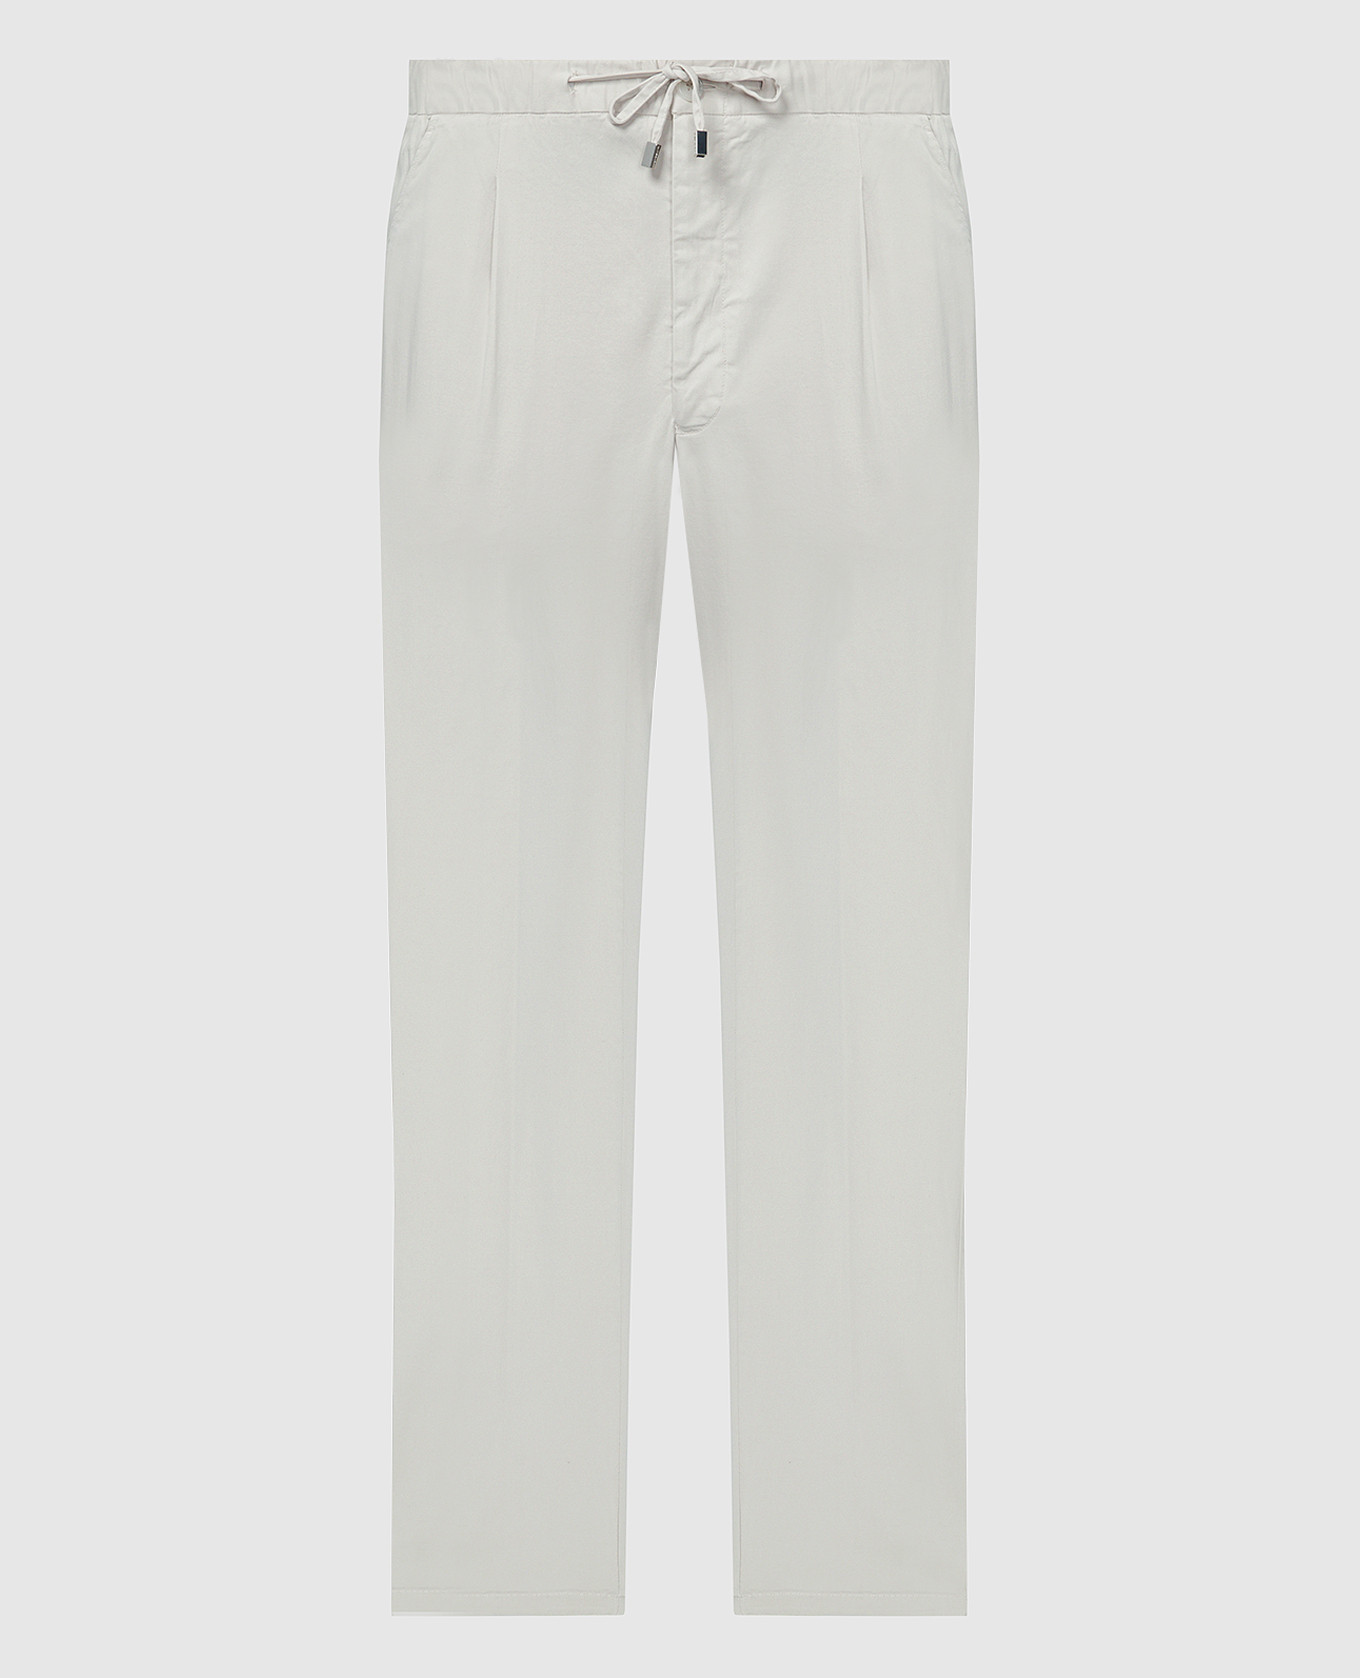 Gray trousers with logo engraving